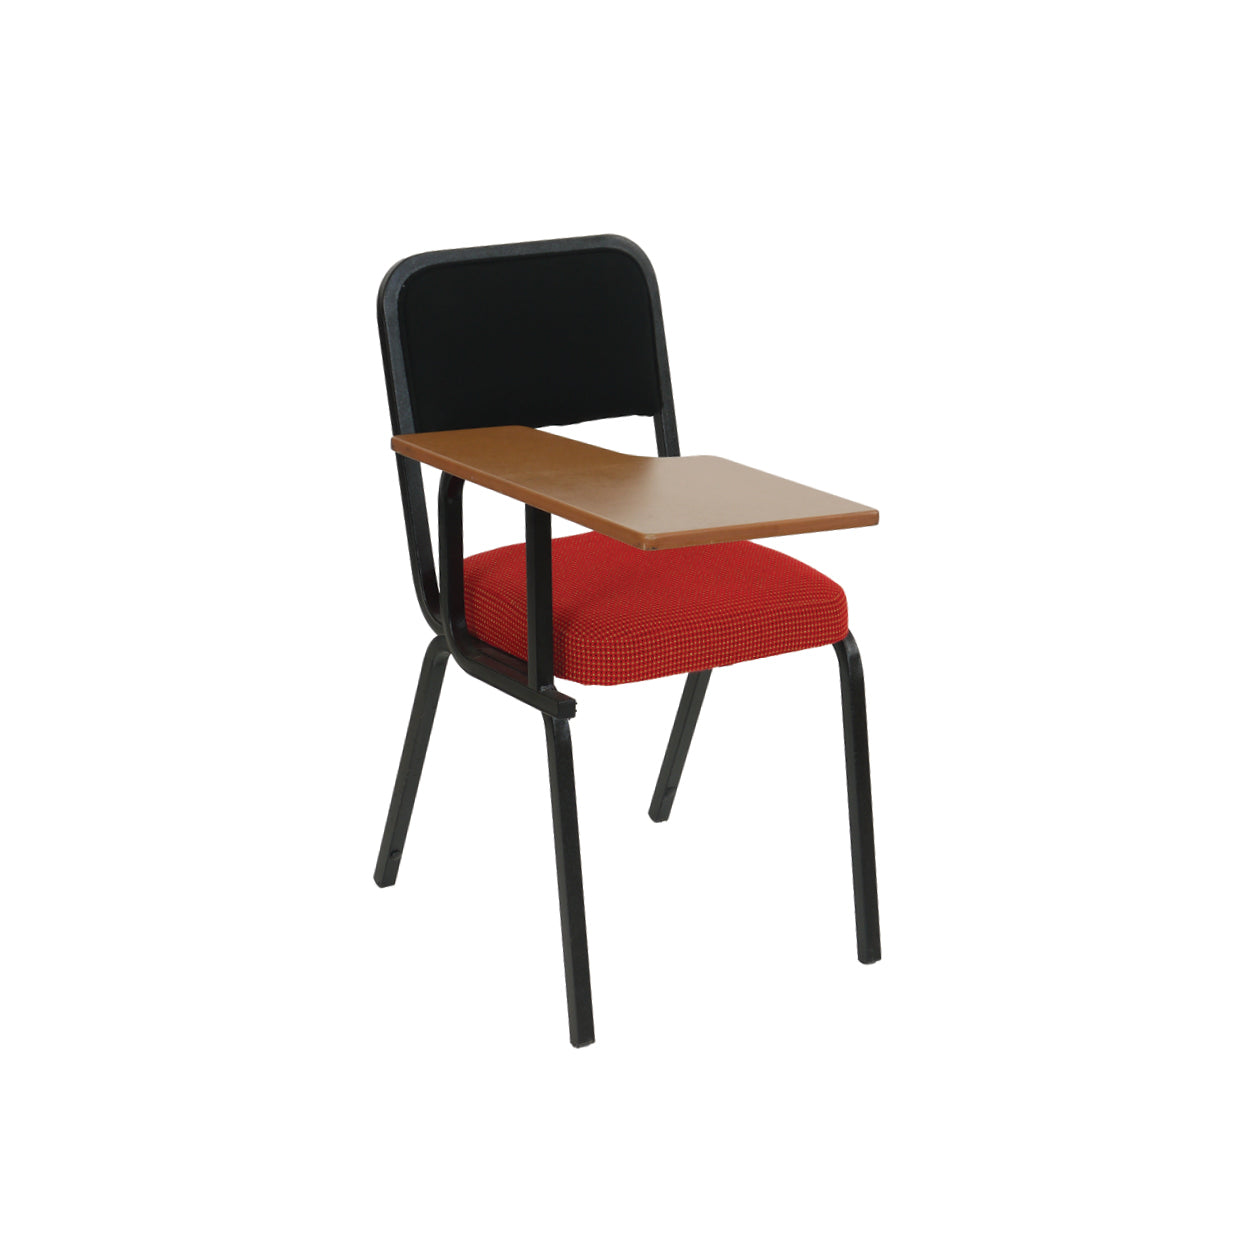 Hedcor chair with tablet